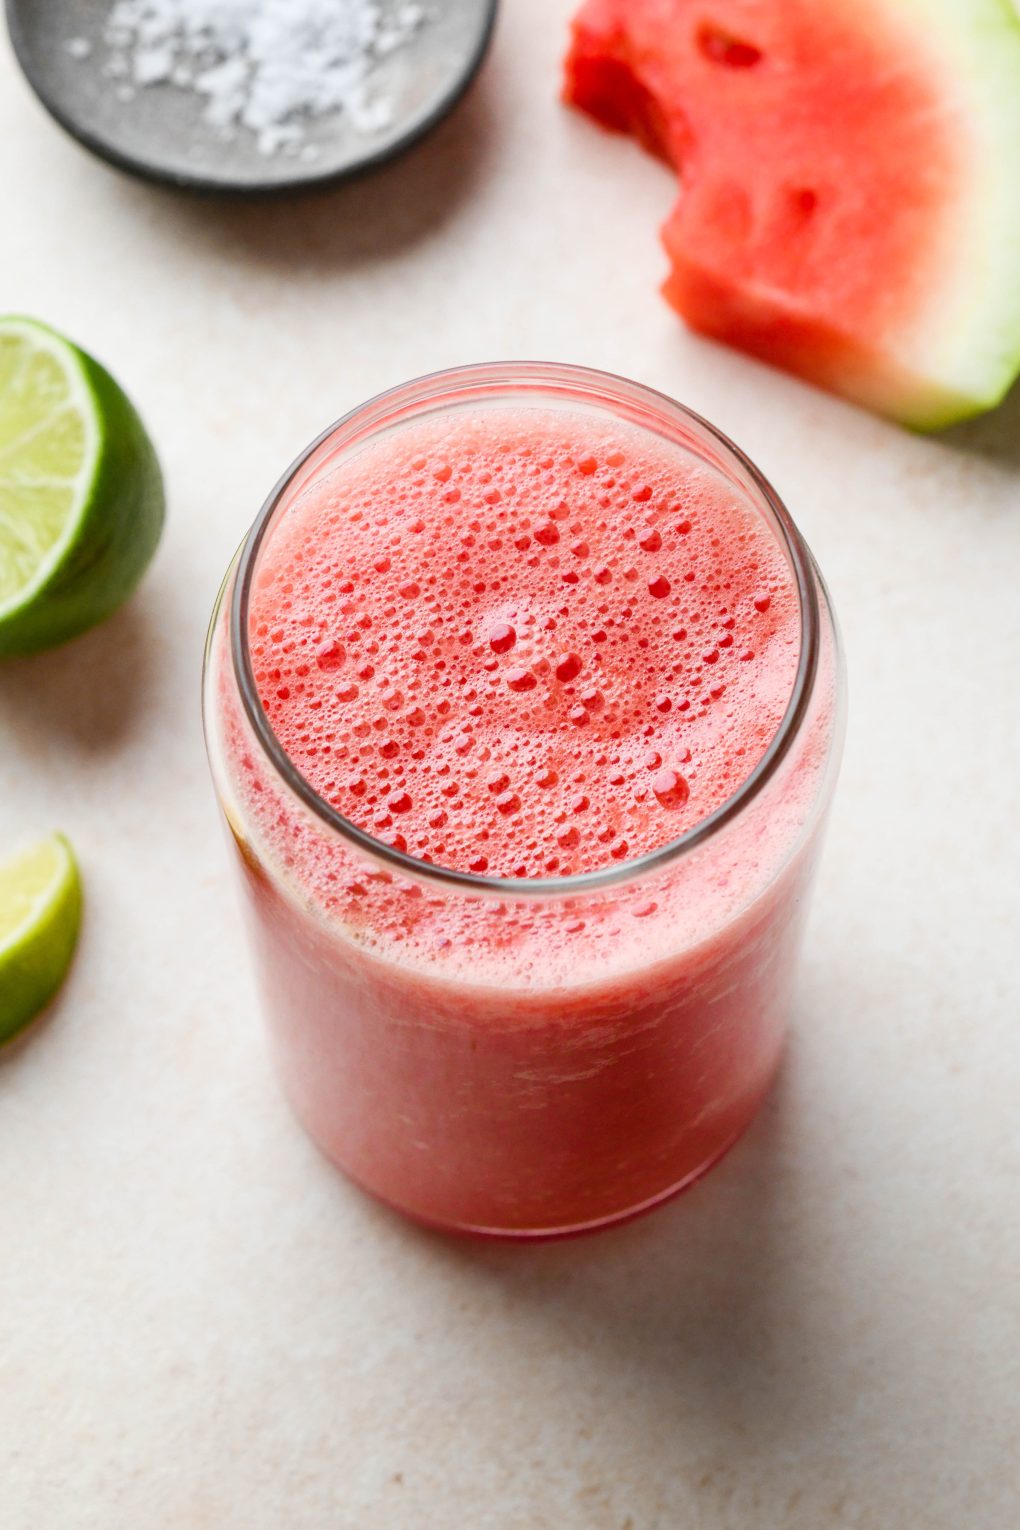 Watermelon juice in a cute glass on a light cream colored background, surrounded by cut watermelon wedges and cut limes.